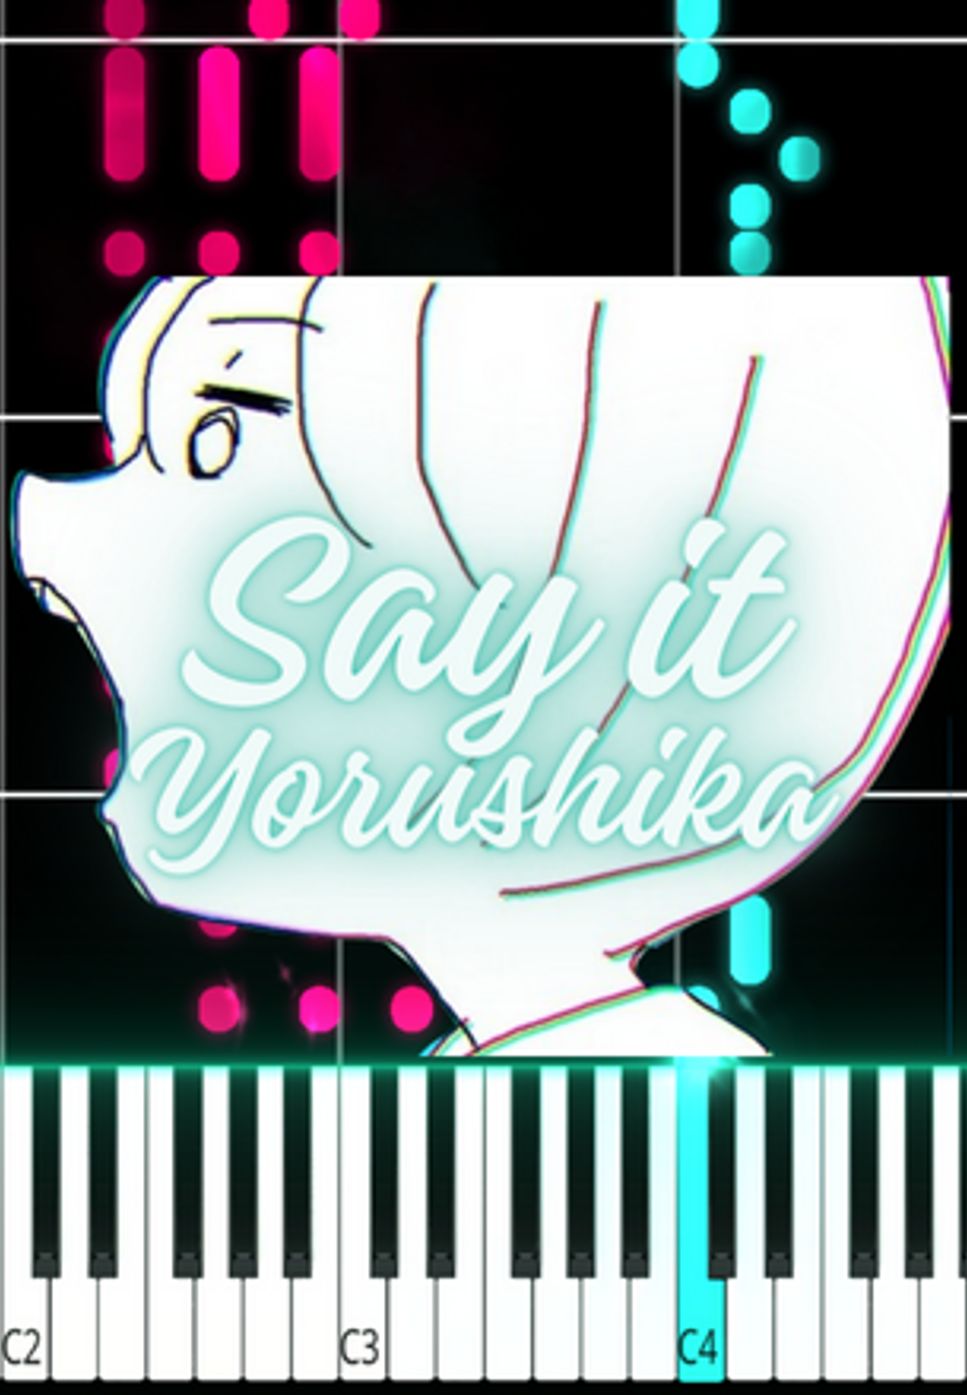 Yorushika - Say it by Marco D.